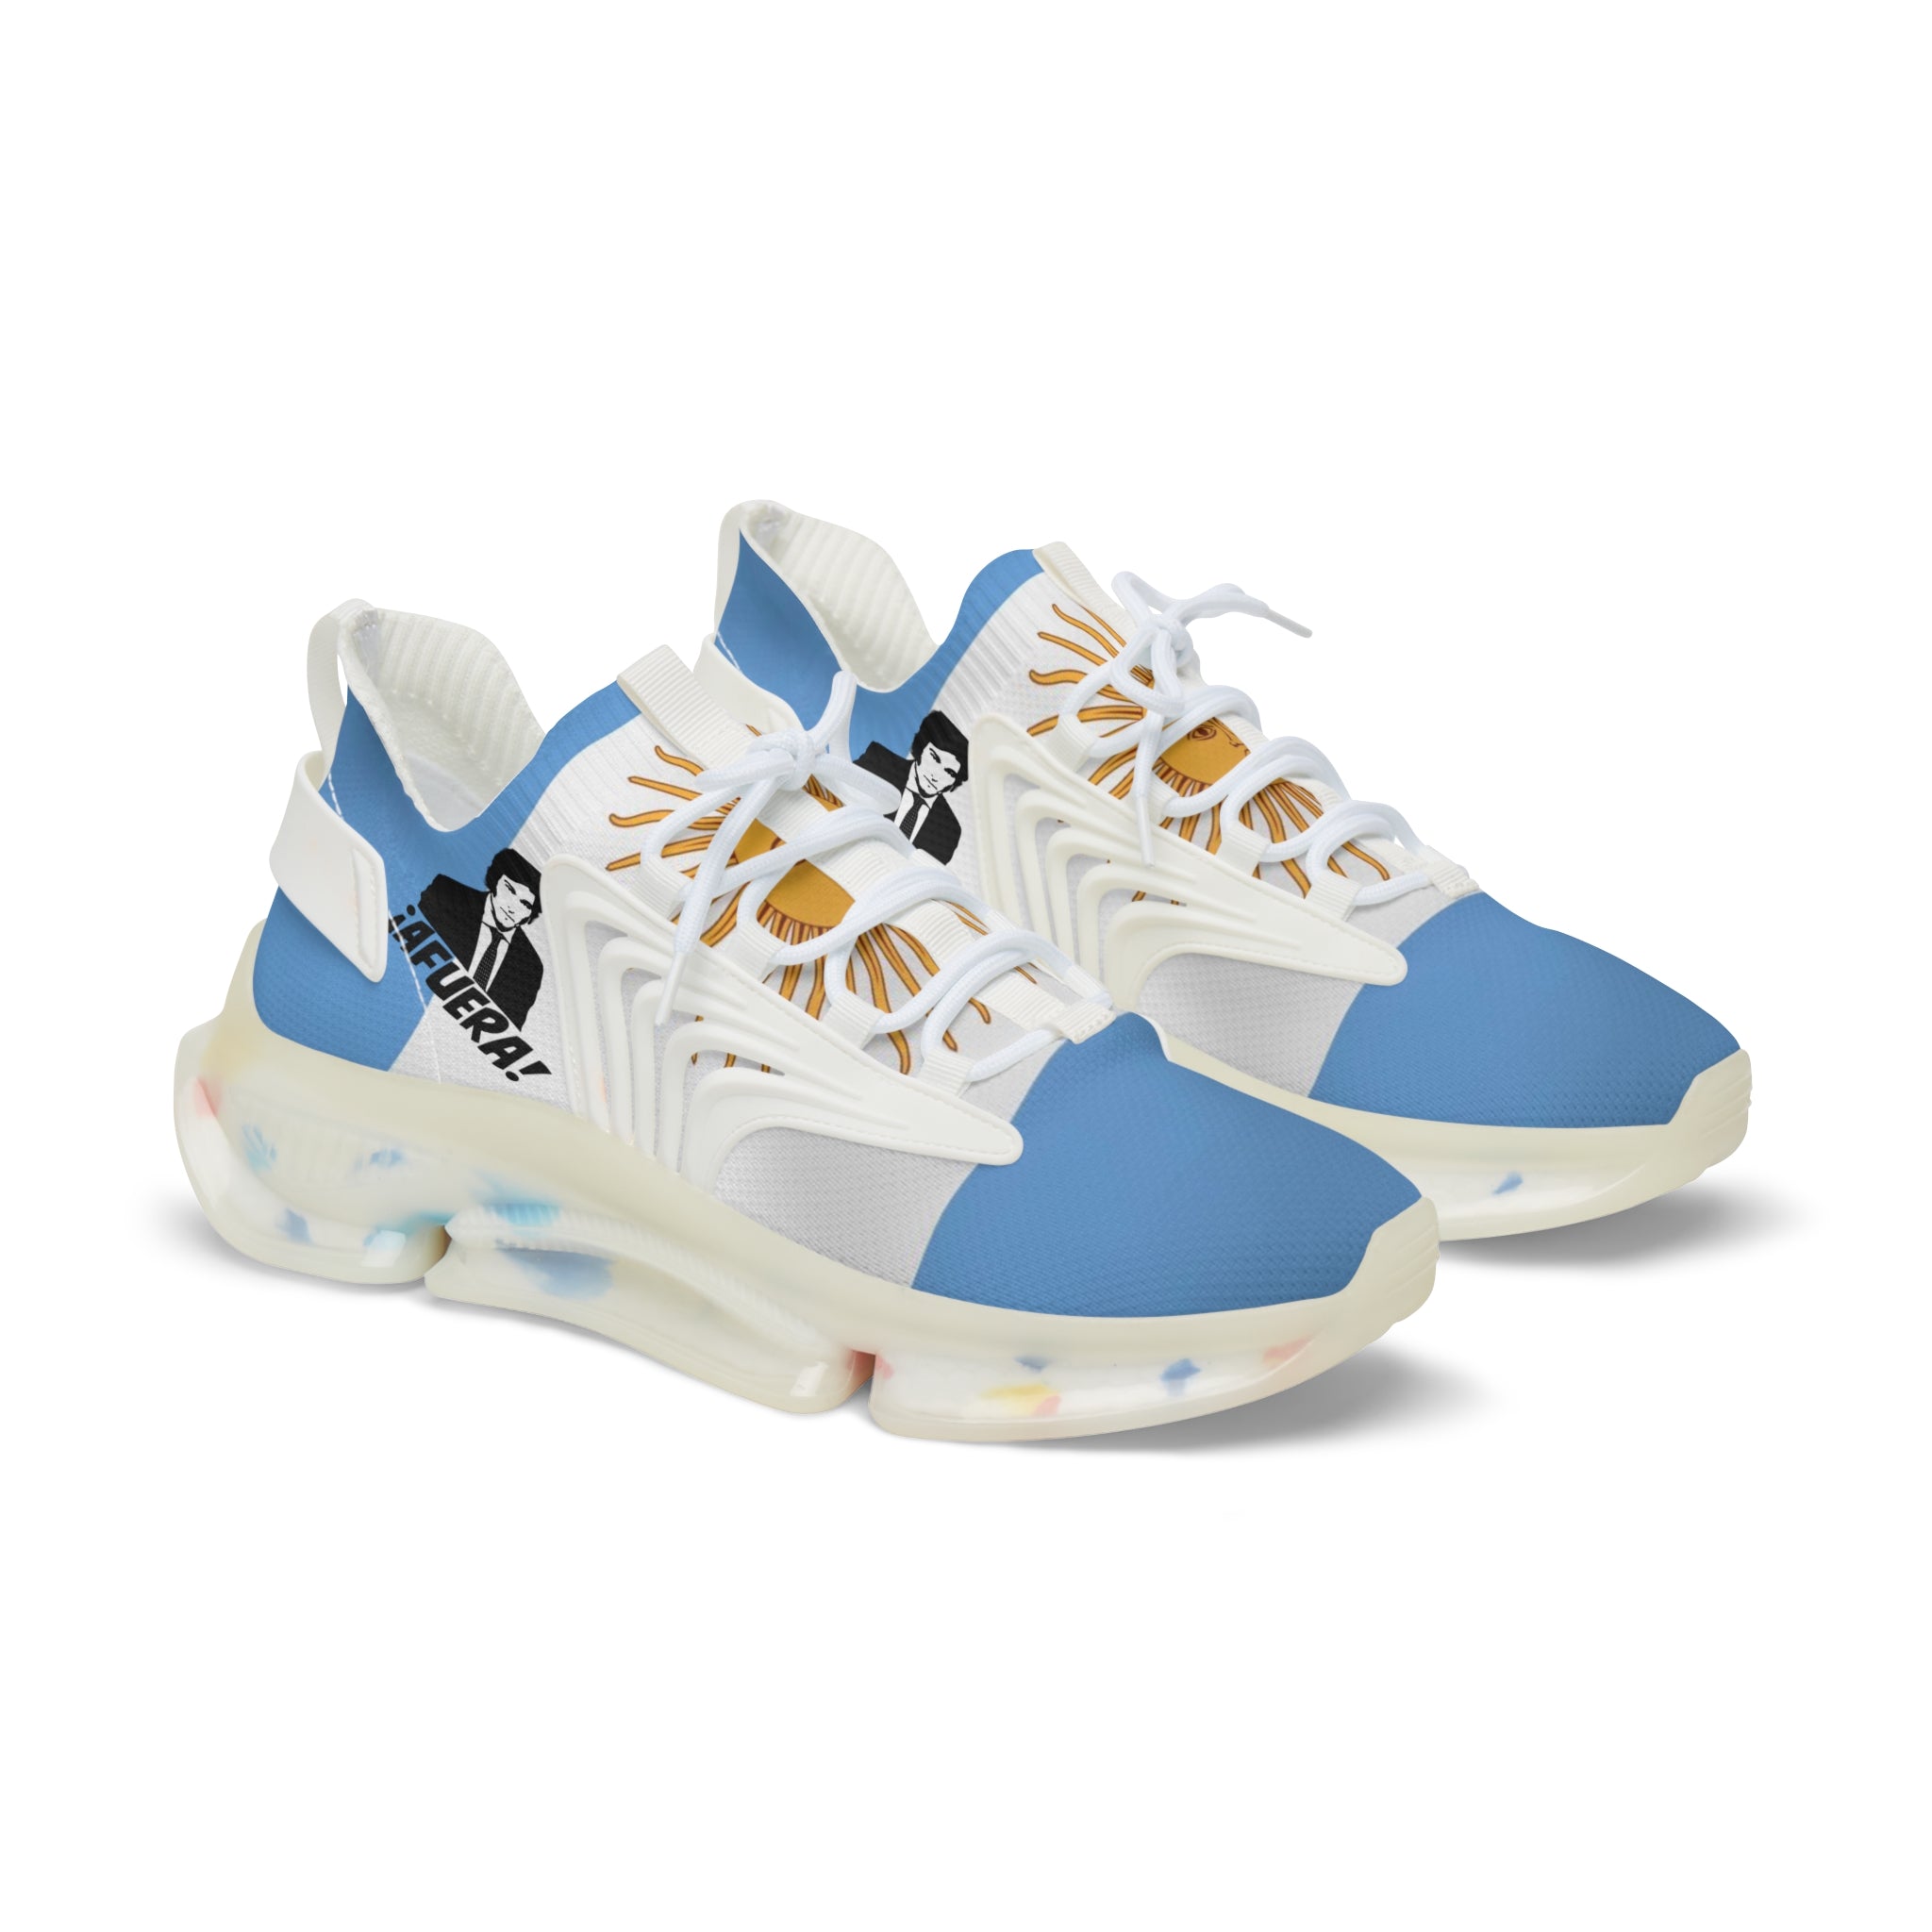 Javier Milei AFUERA Sneakers - Argentina Shipping Friendly | $30 OFF UNTIL MIDNIGHT